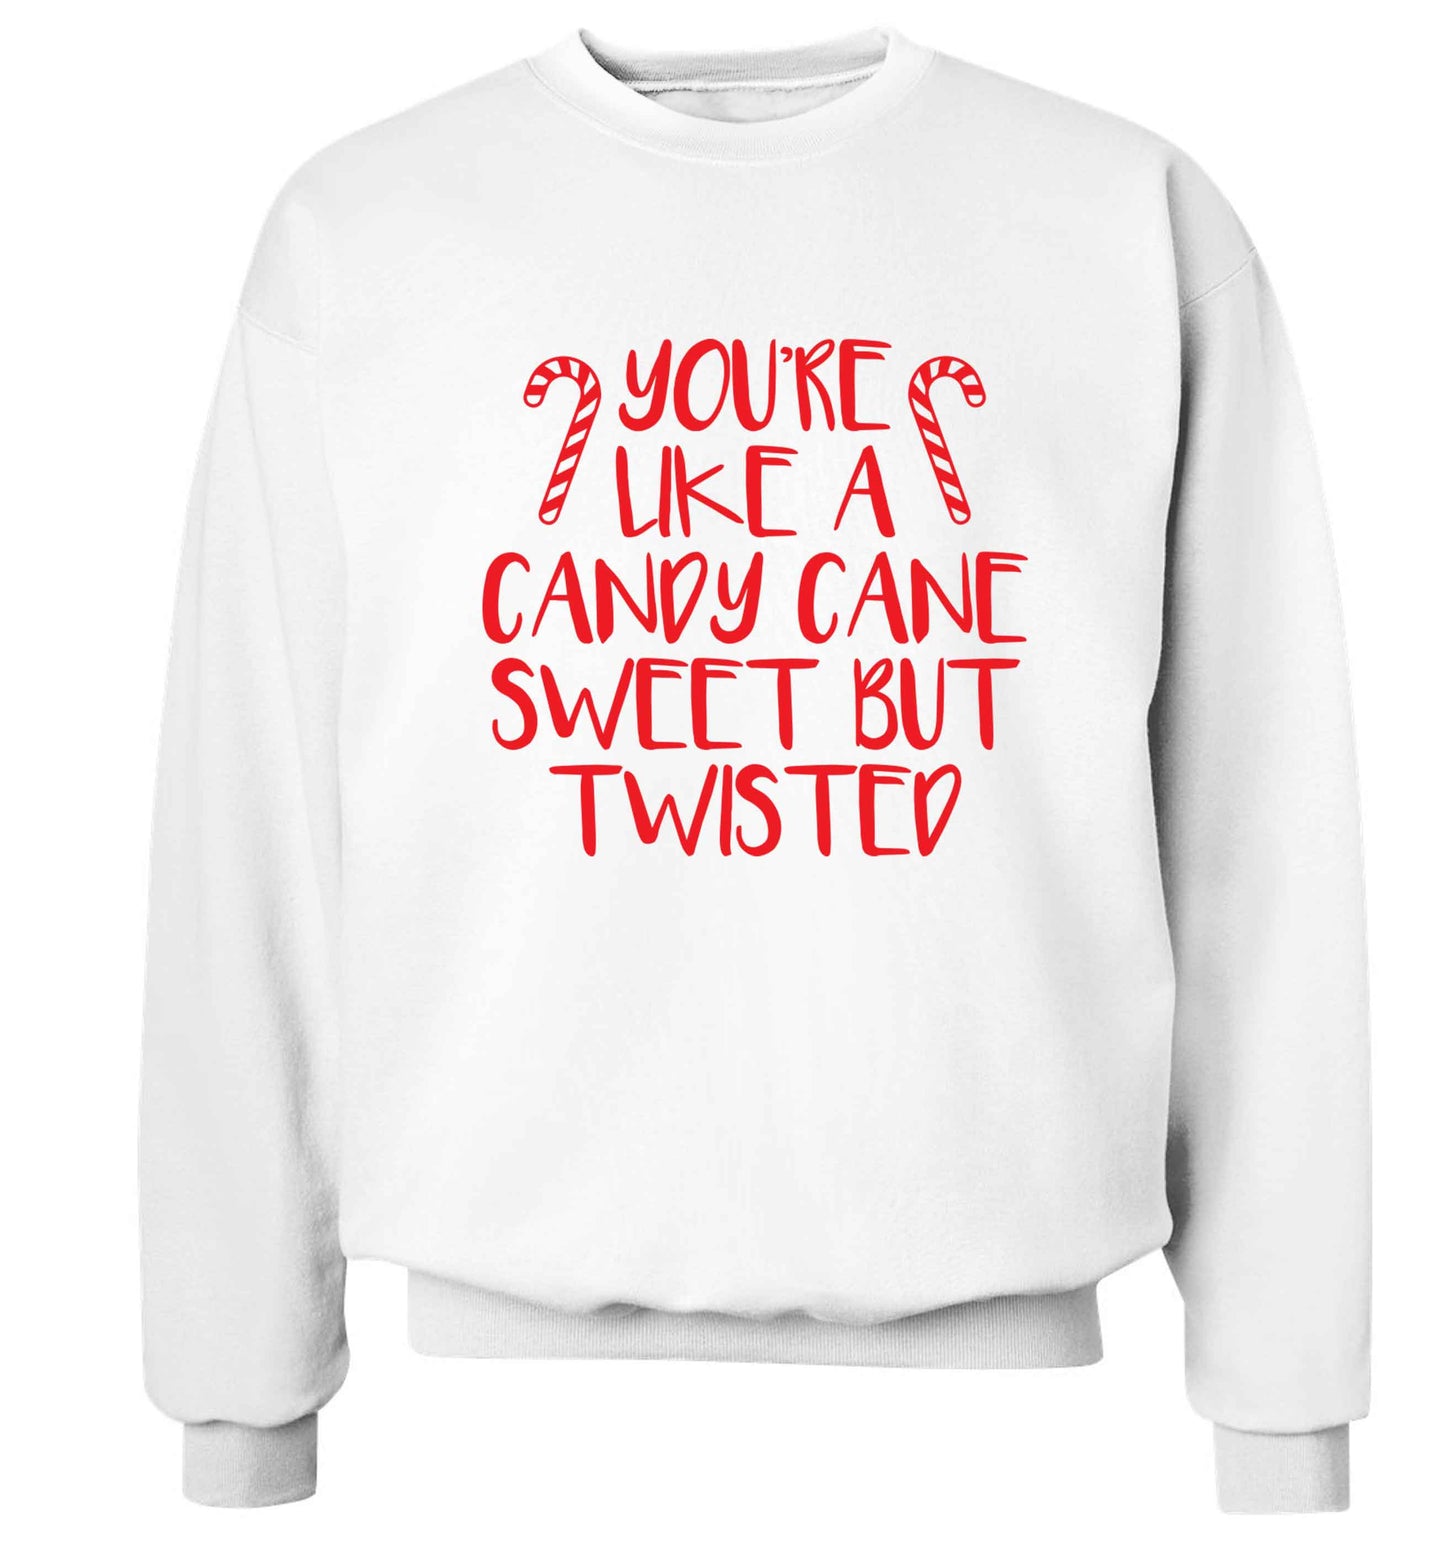 You're like a candy cane sweet but twisted Adult's unisex white Sweater 2XL